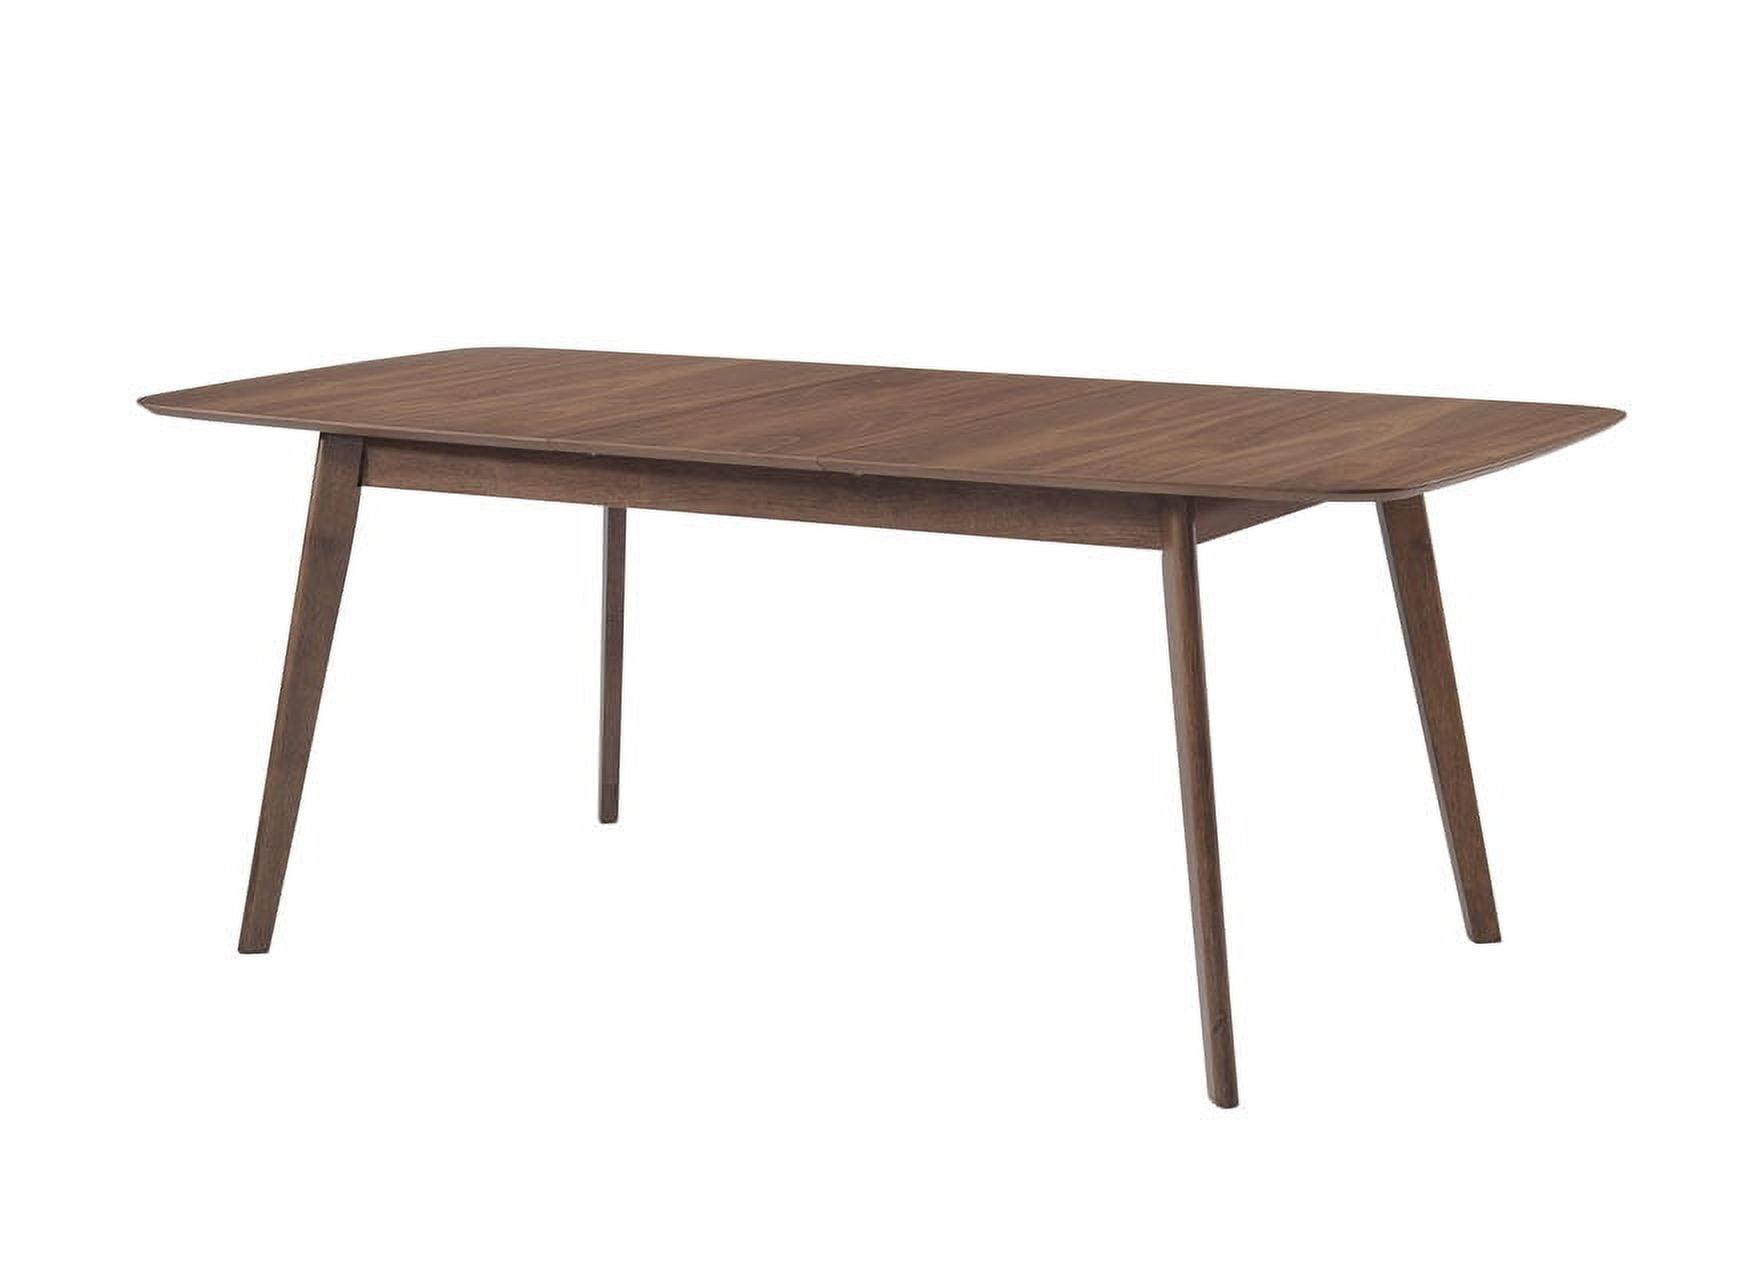 Natural Walnut Extendable Mid-Century Modern Dining Table